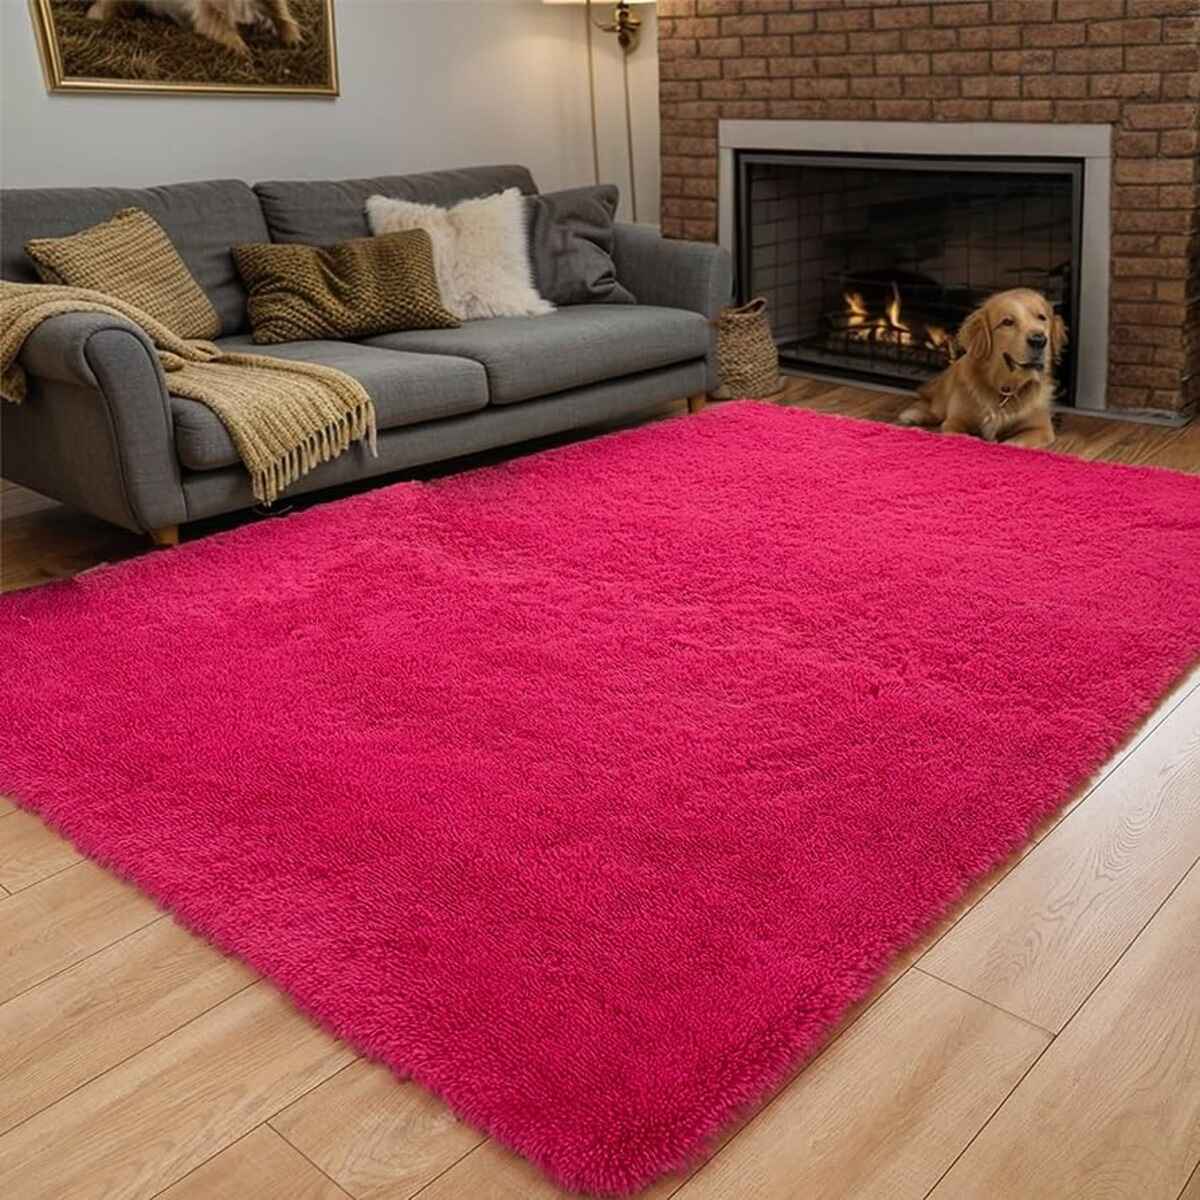 Supreme Red Color Luxury Brand Carpet Rug Limited Edition